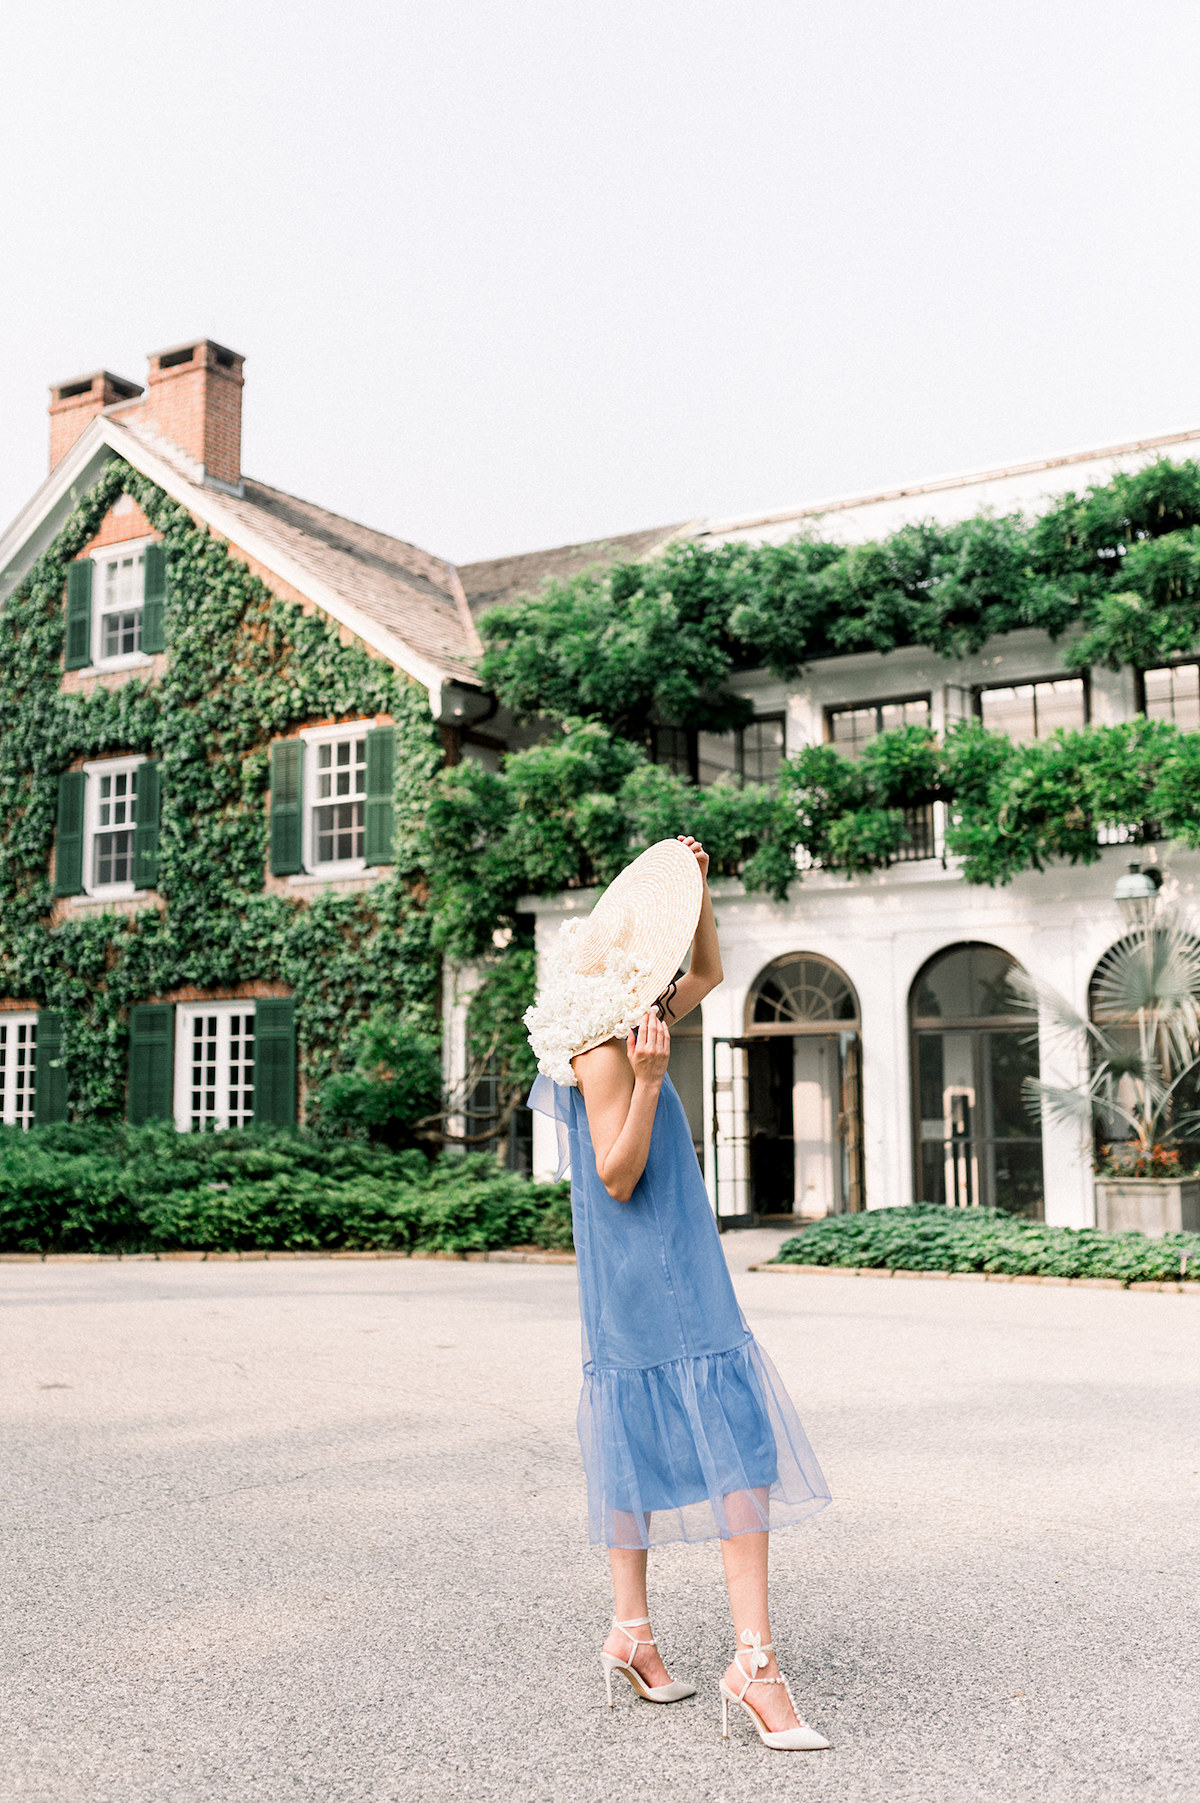 In her Anthropologie French blue gown and a hat adorned with delicate white hydrangeas, Karla adds a touch of vintage charm to the scene as she poses gracefully in front of a historical house at Longwood Gardens.